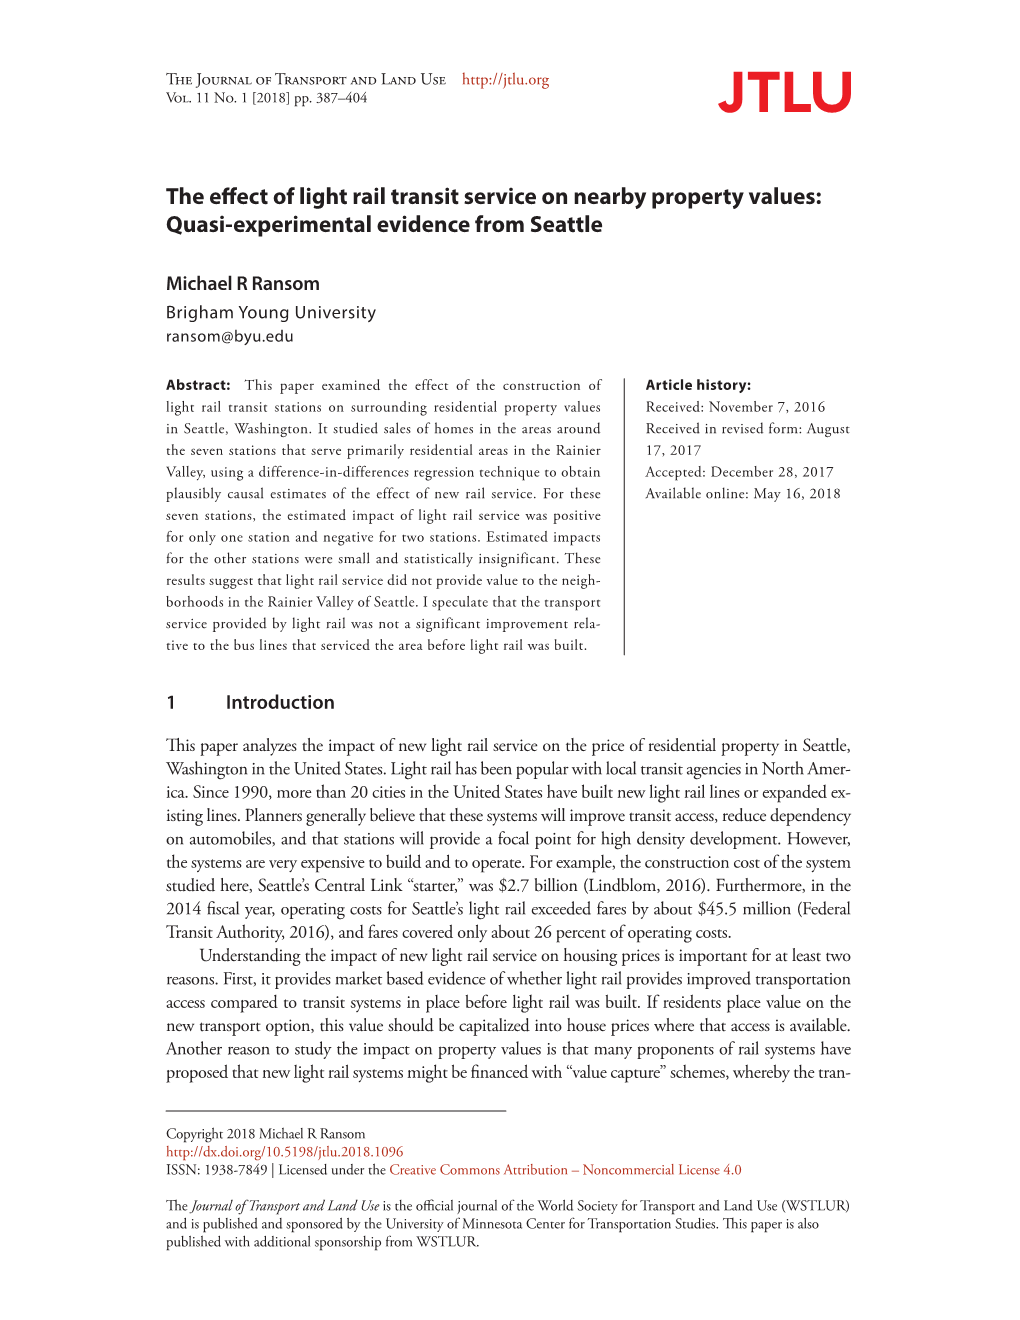 The Effect of Light Rail Transit Service on Nearby Property Values: Quasi-Experimental Evidence from Seattle